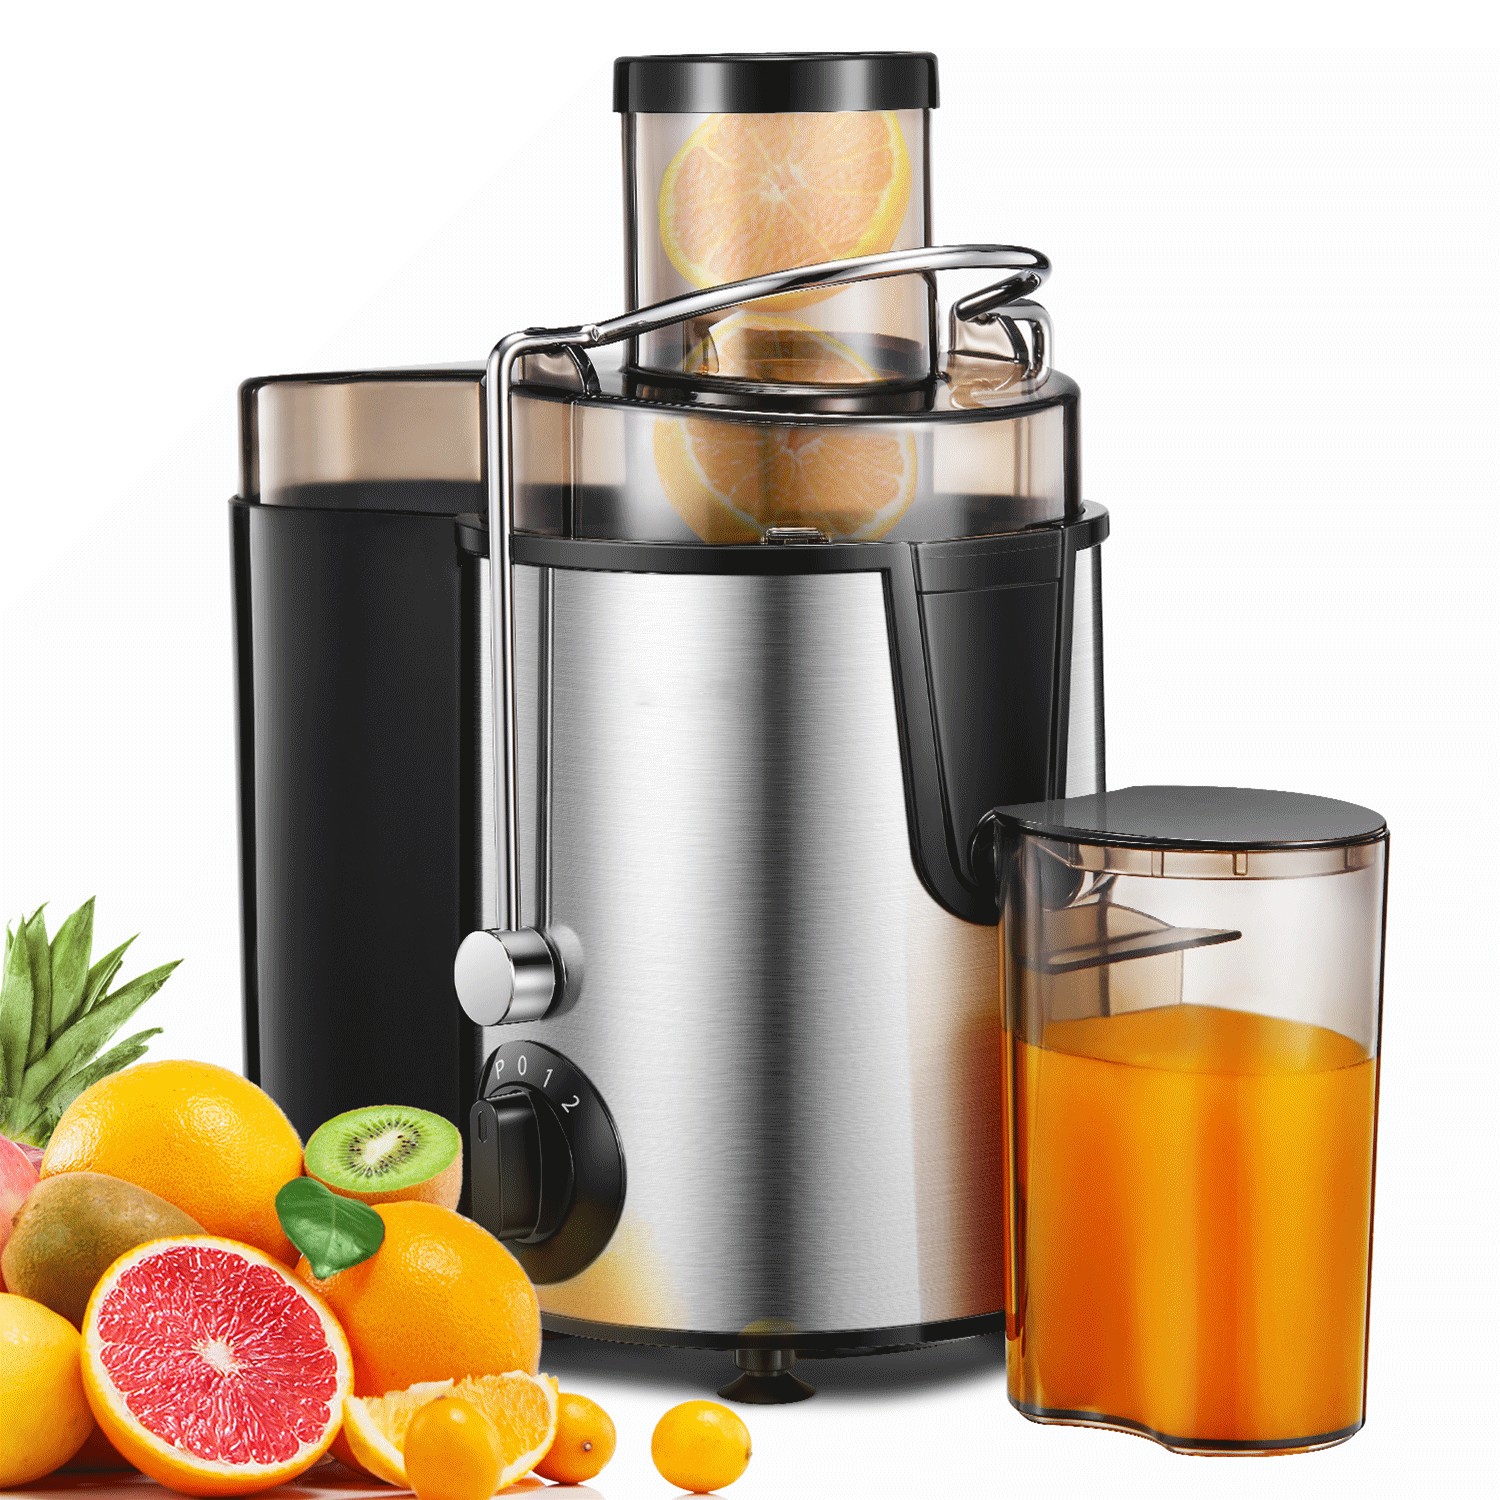 Juicer Centrifugal Juicer Machine Wide 3” Feed Chute Juice Extractor Easy to Clean, Fruit Juicer with Pulse Function and Multi-Speed Control, Anti-Drip, Stainless Steel BPA-Free - image 1 of 12